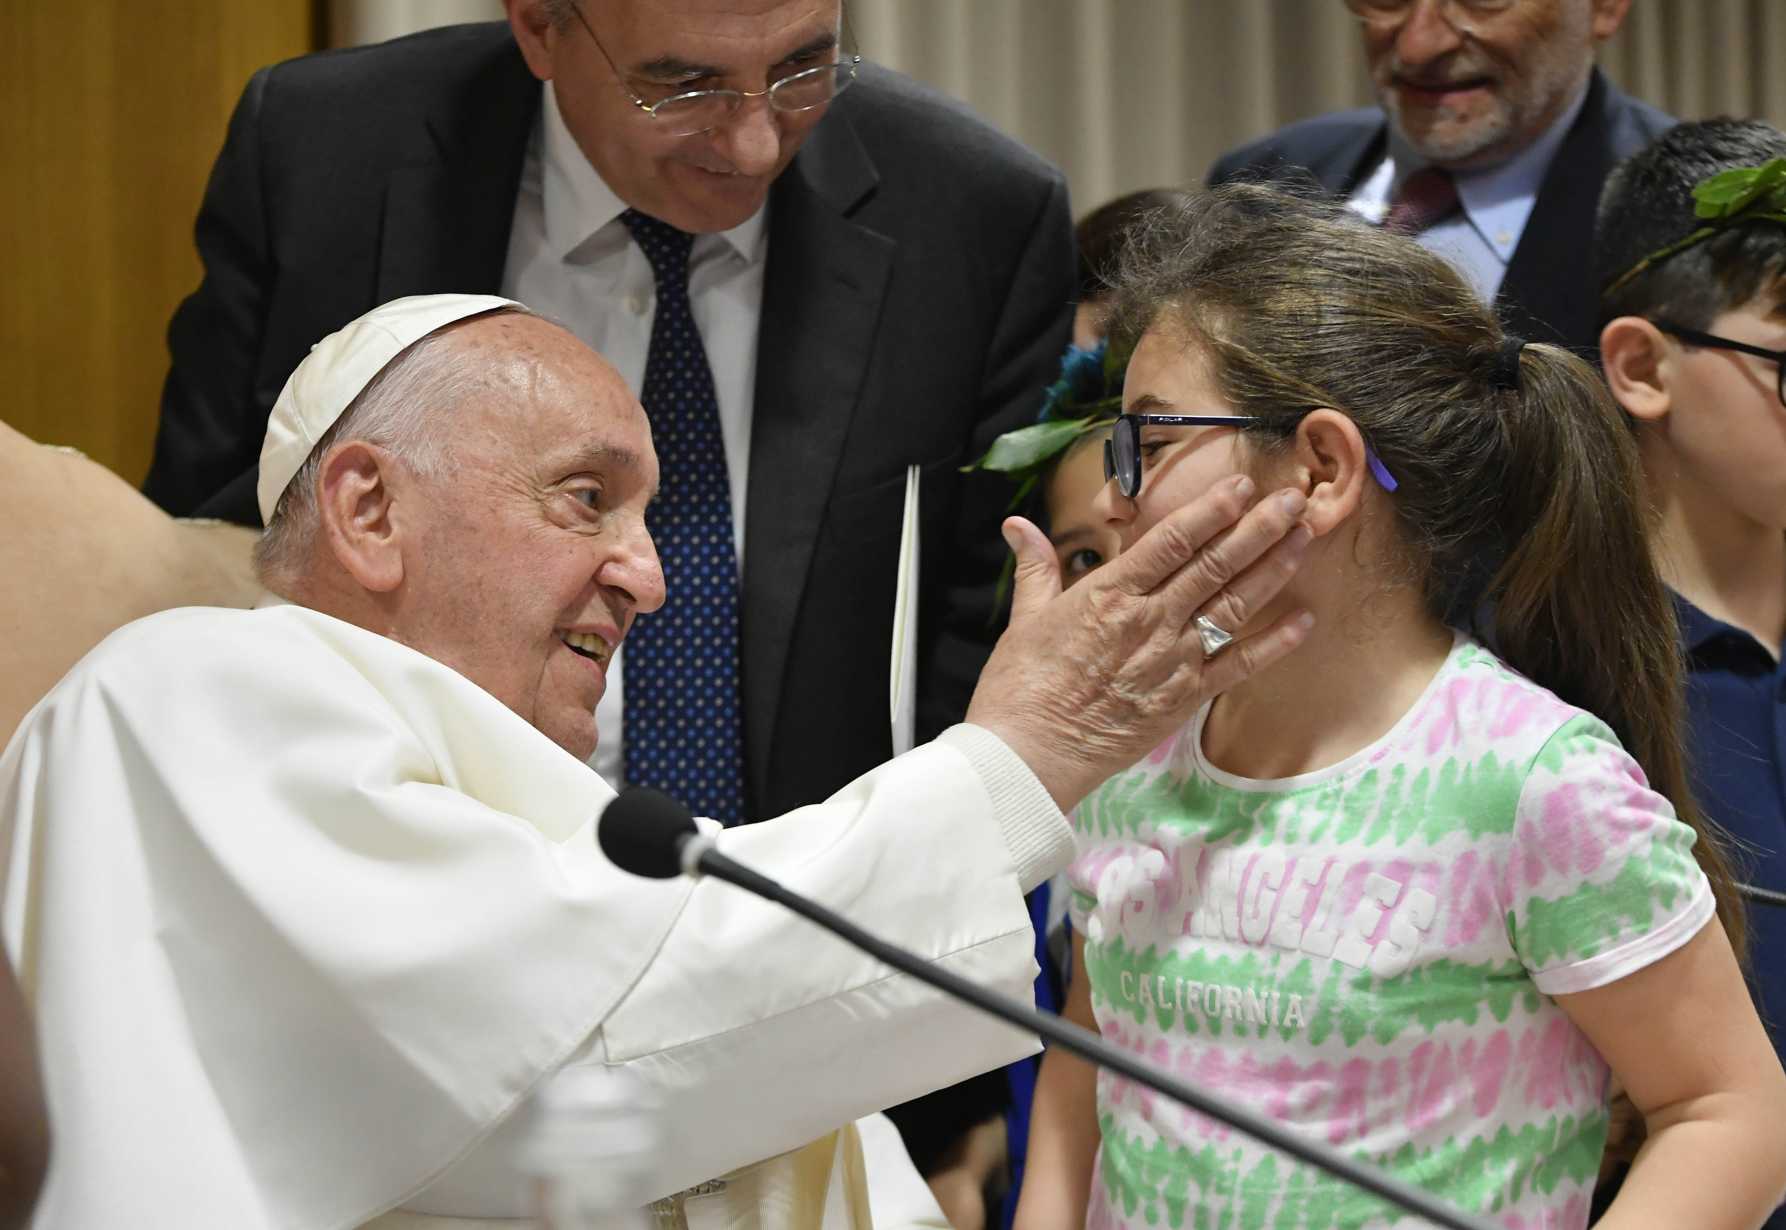 Peace in politics, in the world starts in people's hearts, pope says